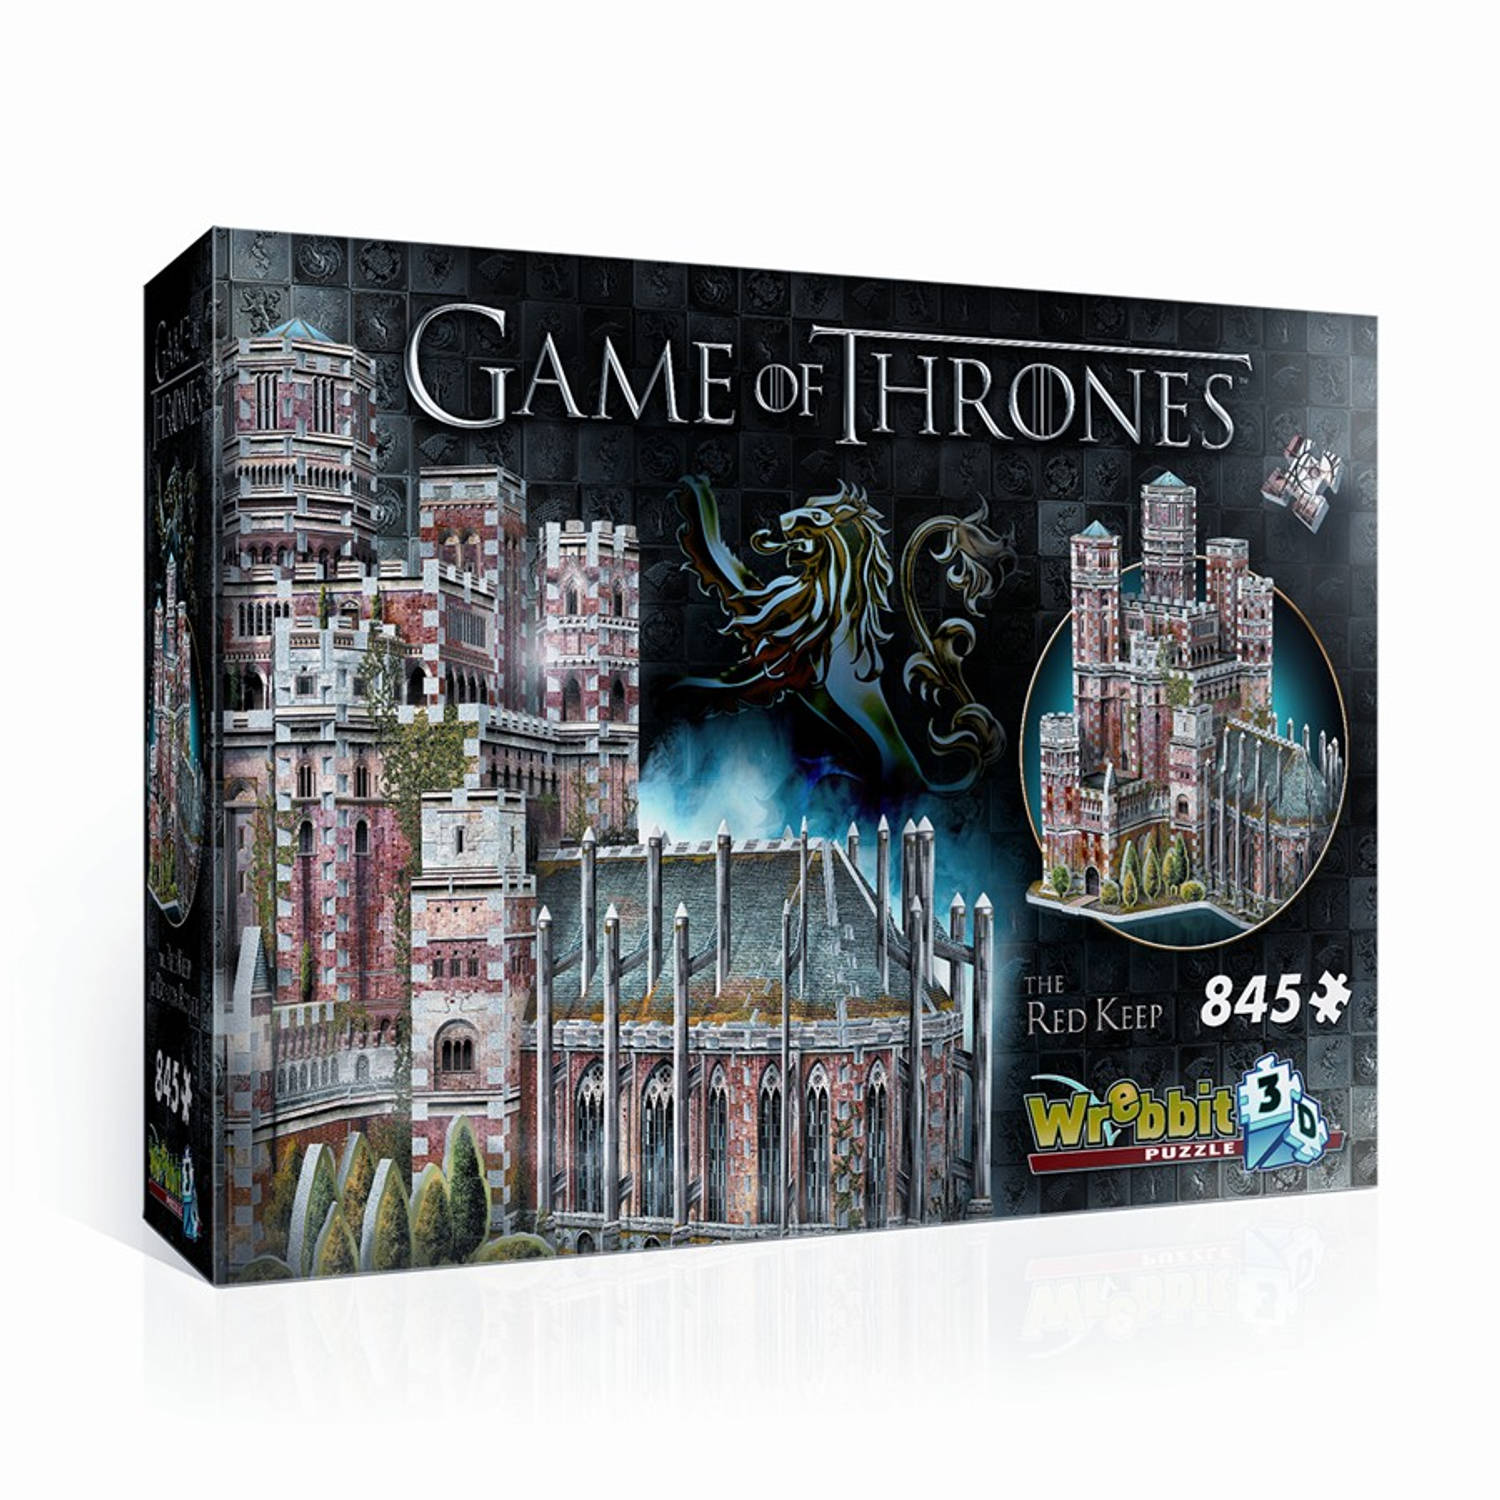 Wrebbit Wrebbit 3D Puzzle Game of Thrones The Red Keep (845)